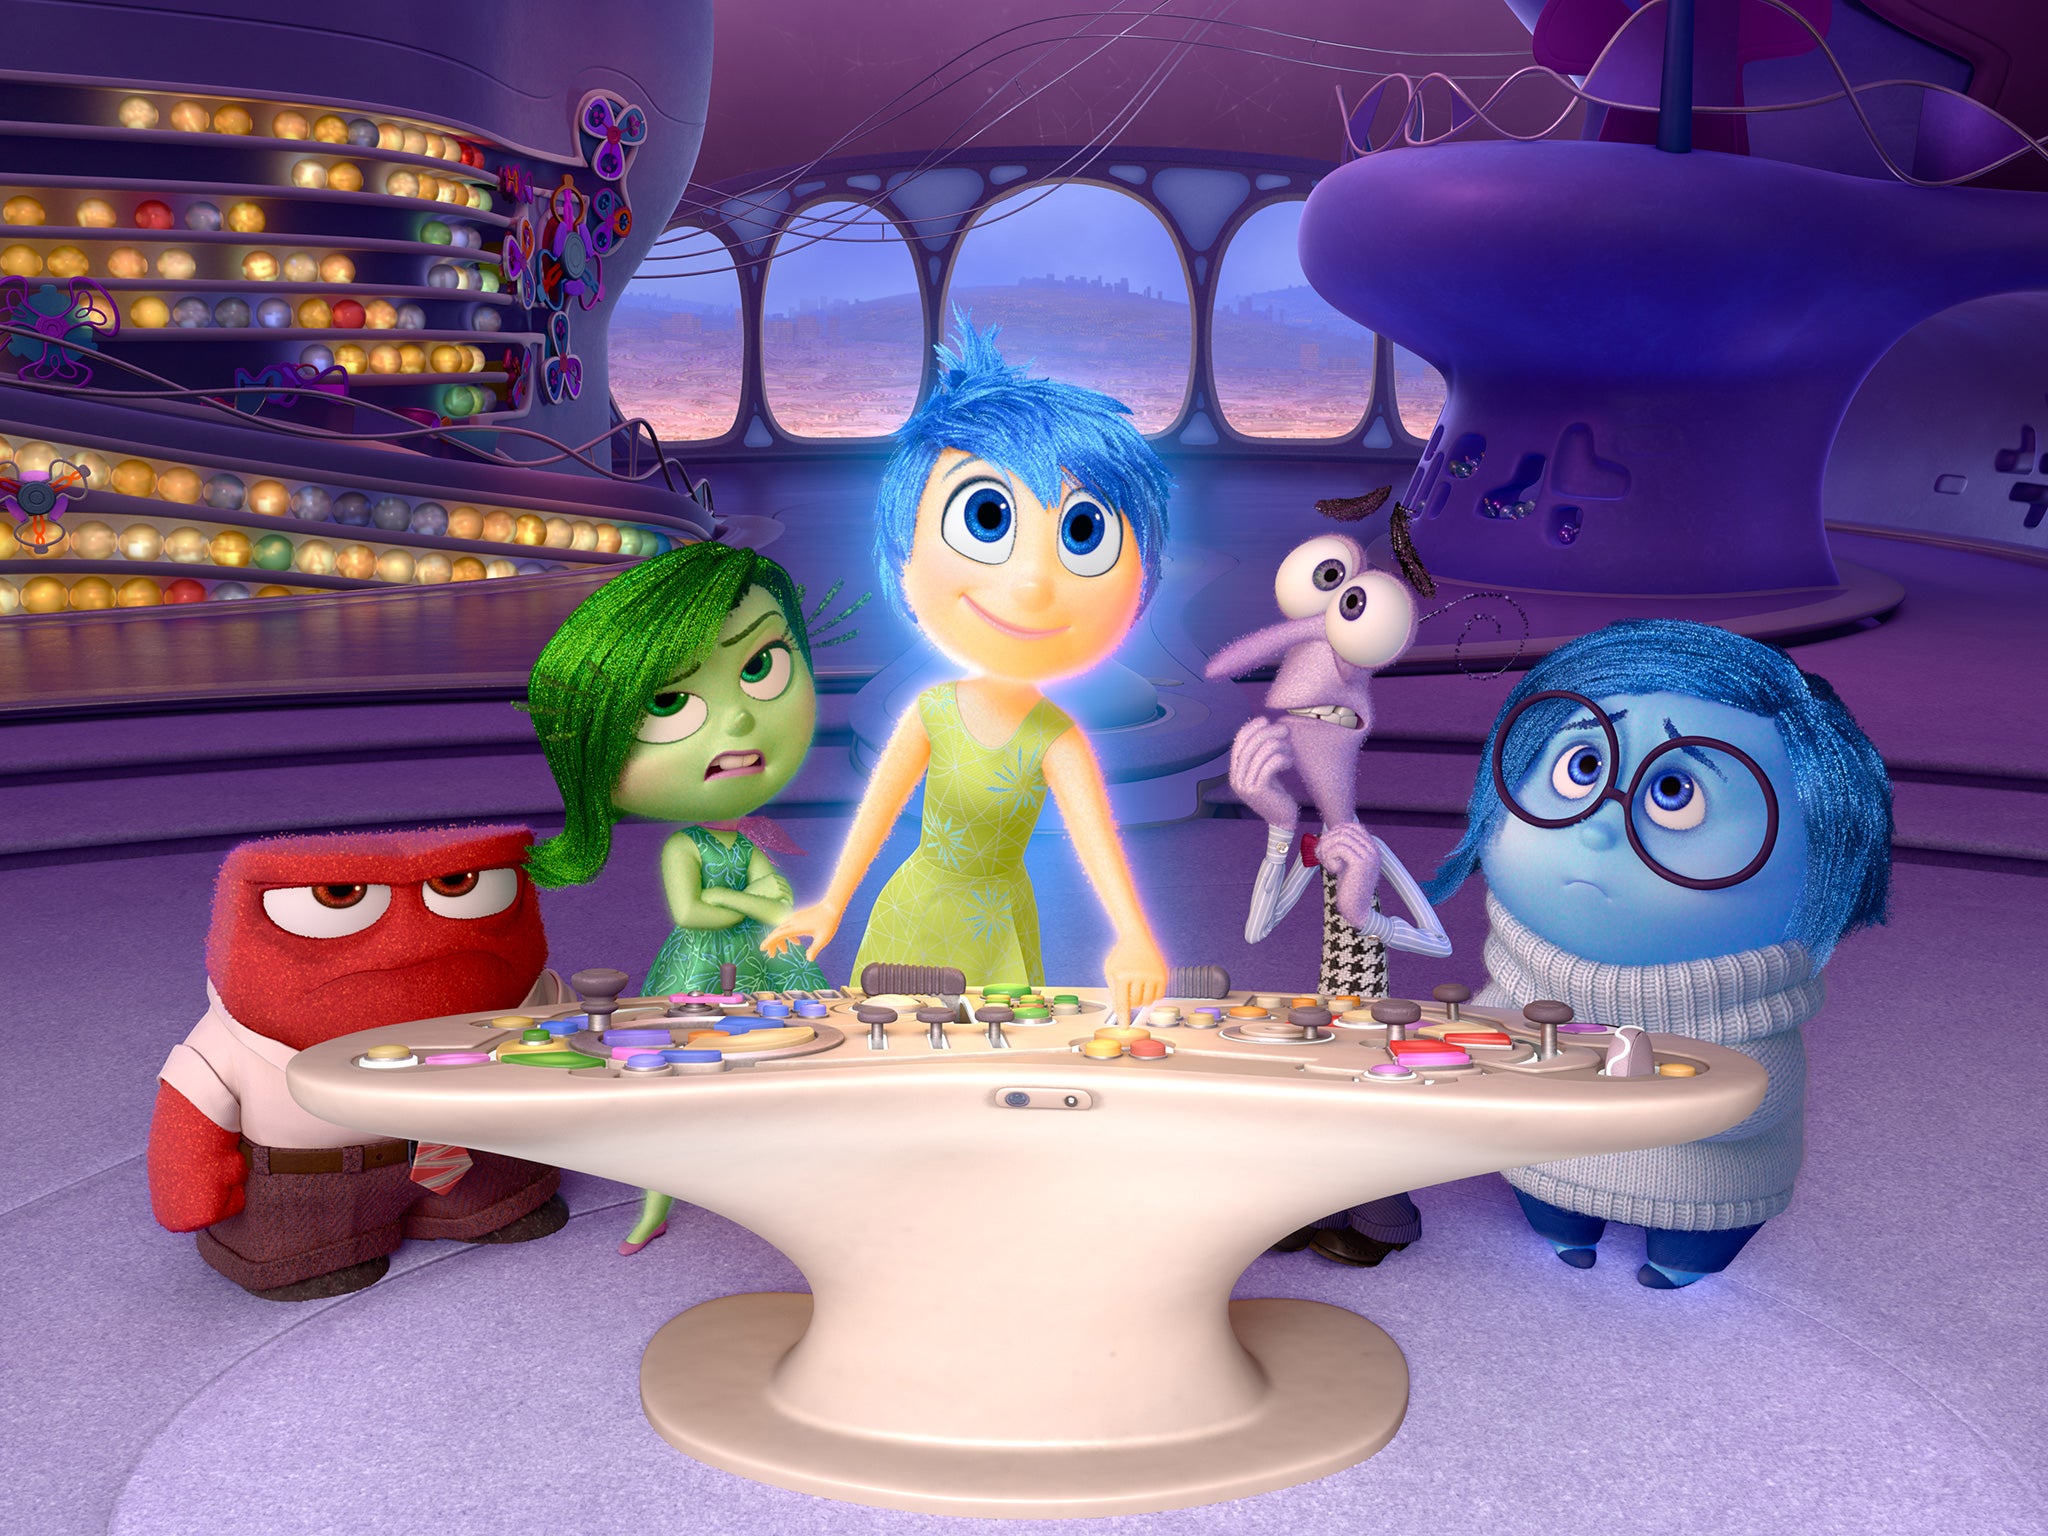 A still from Pixar's Inside Out